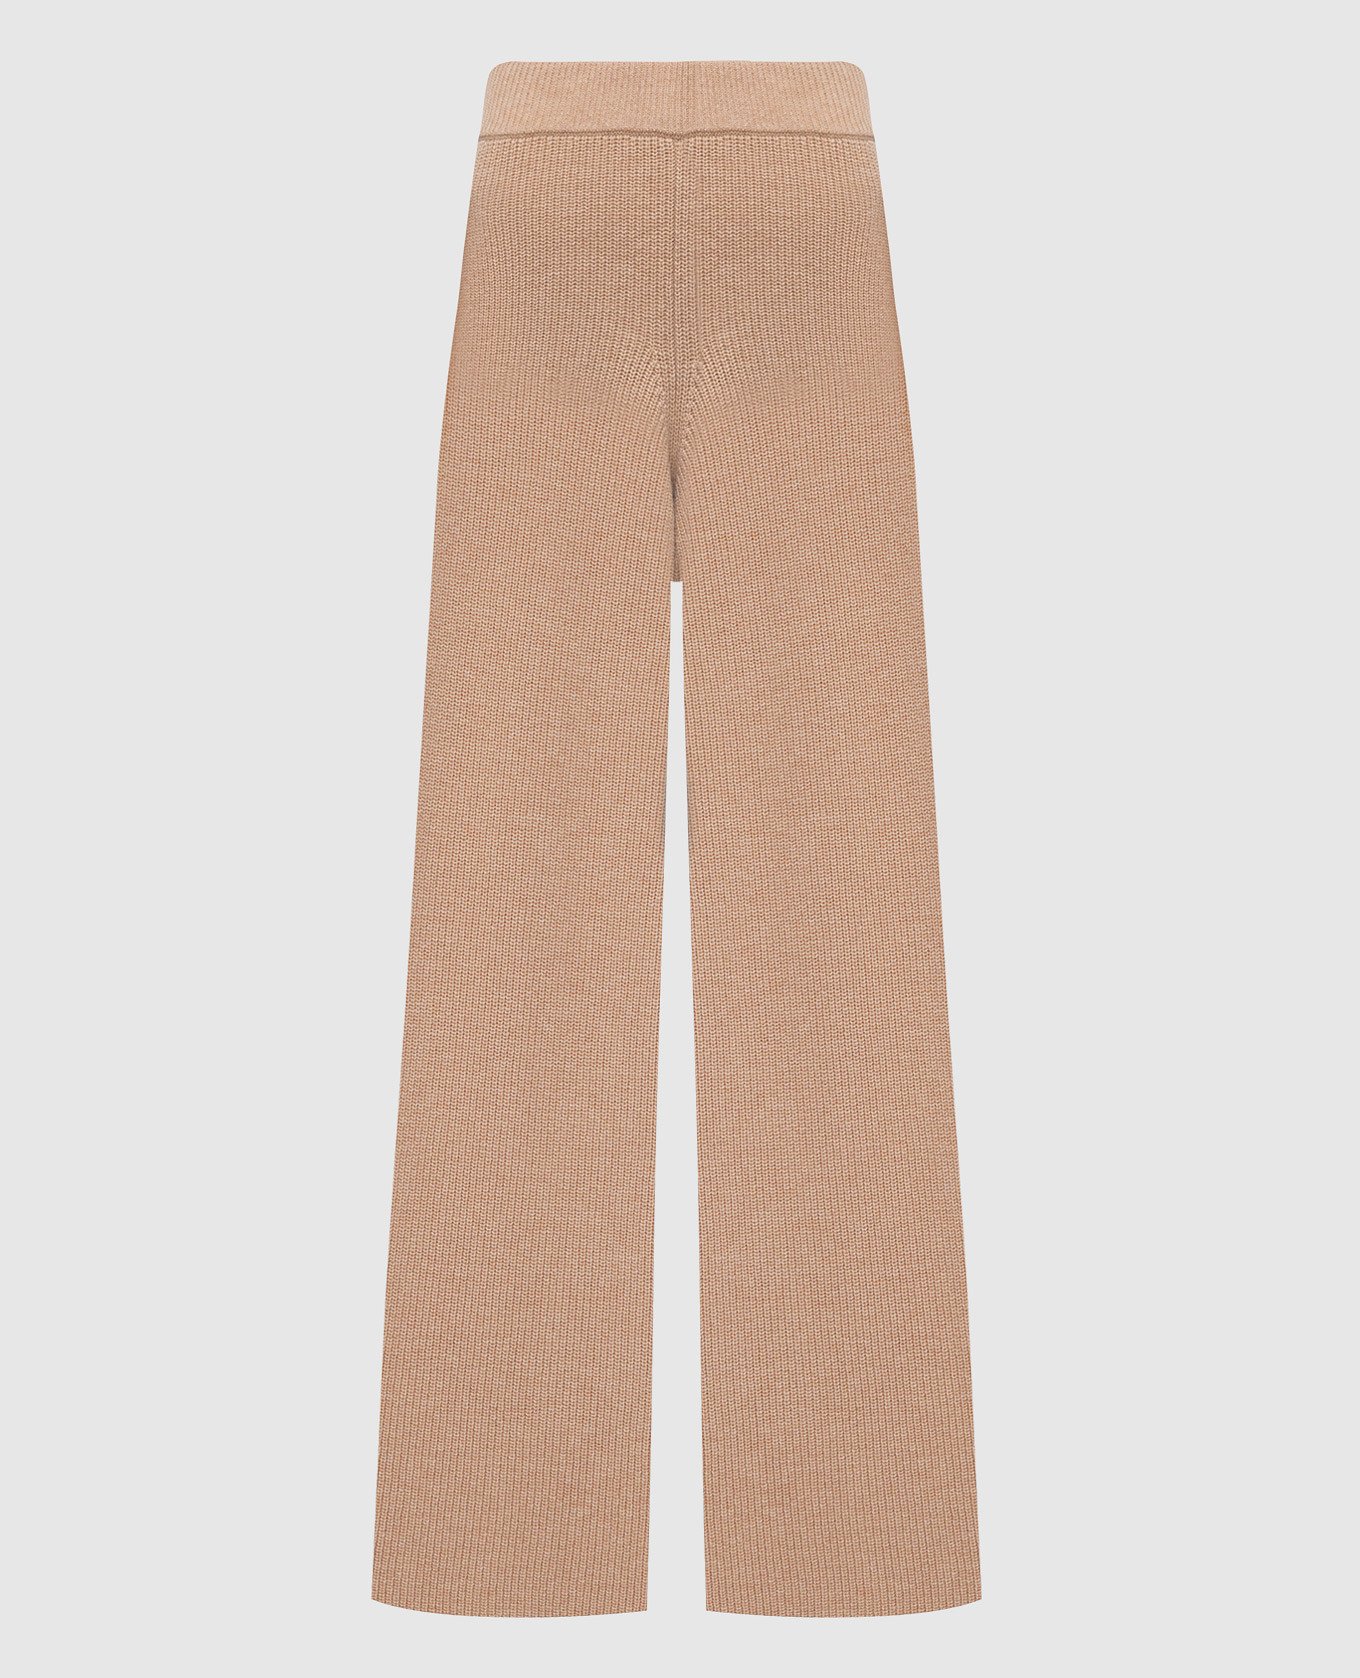 Beige wide trousers made of wool